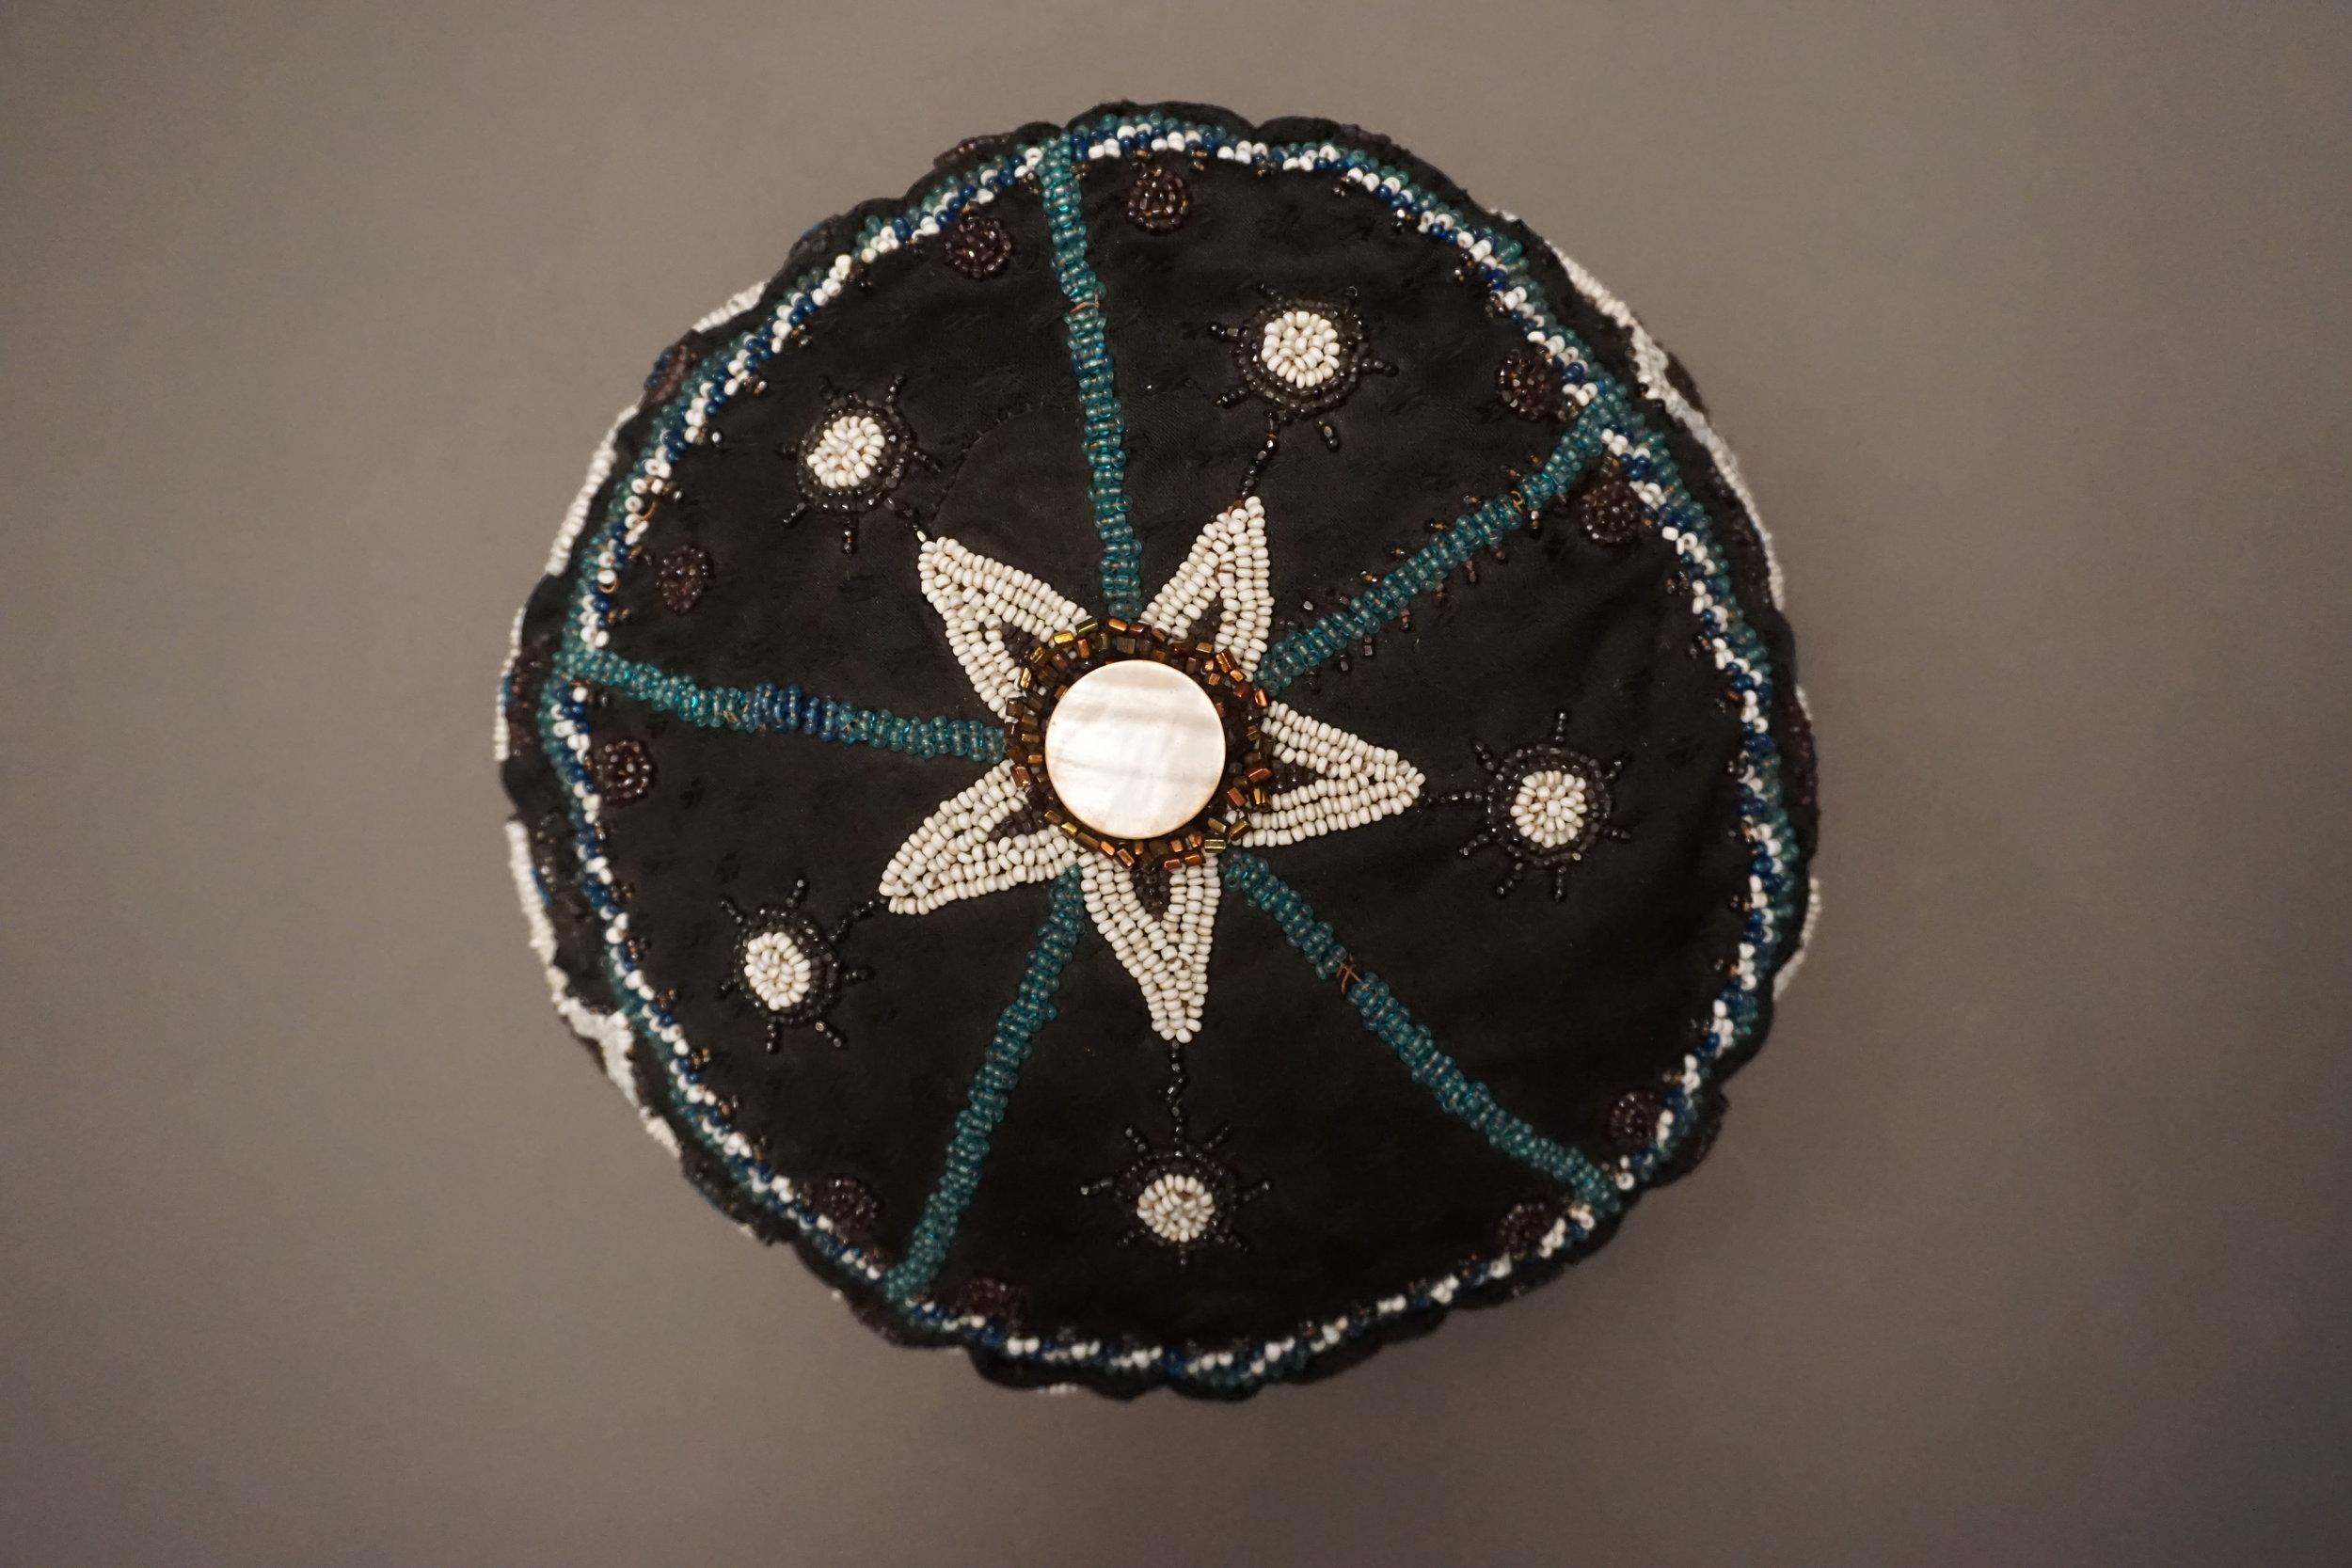 Region / Tribe: Kansas/ Nebraska border/ Otoe-Missouria
circa 1891-1895
Material: Various cloths, glass beads, cotton thread, shell disk
Dimension: Diameter 10 inches, height 2 3/4 inches 
Condition: Overall excellent. Minor bead loss along